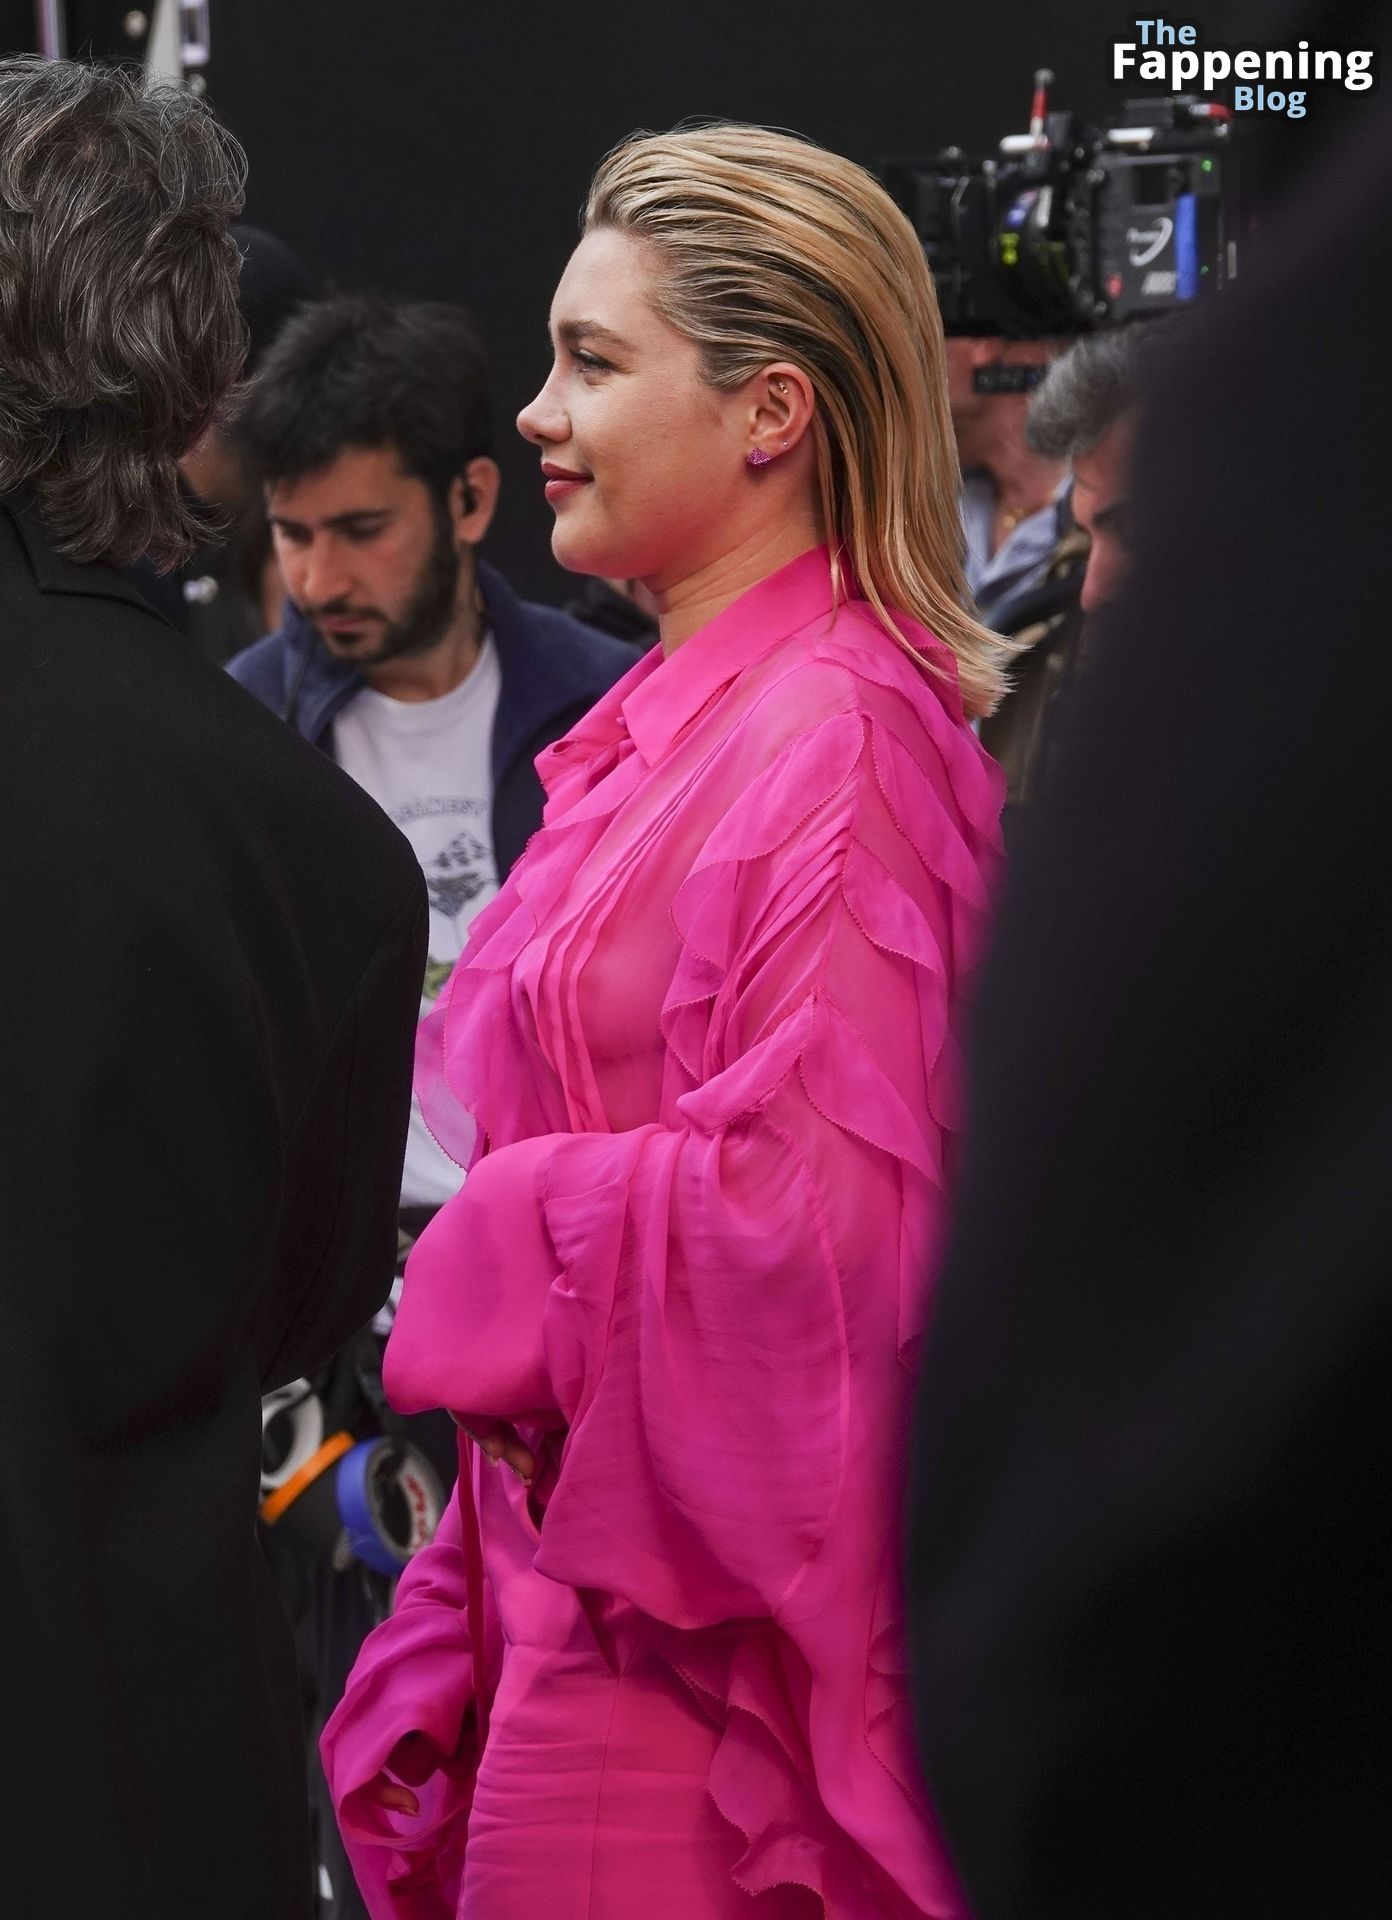 Florence-Pugh-Nude-Tits-The-Fappening-Blog-60.jpg